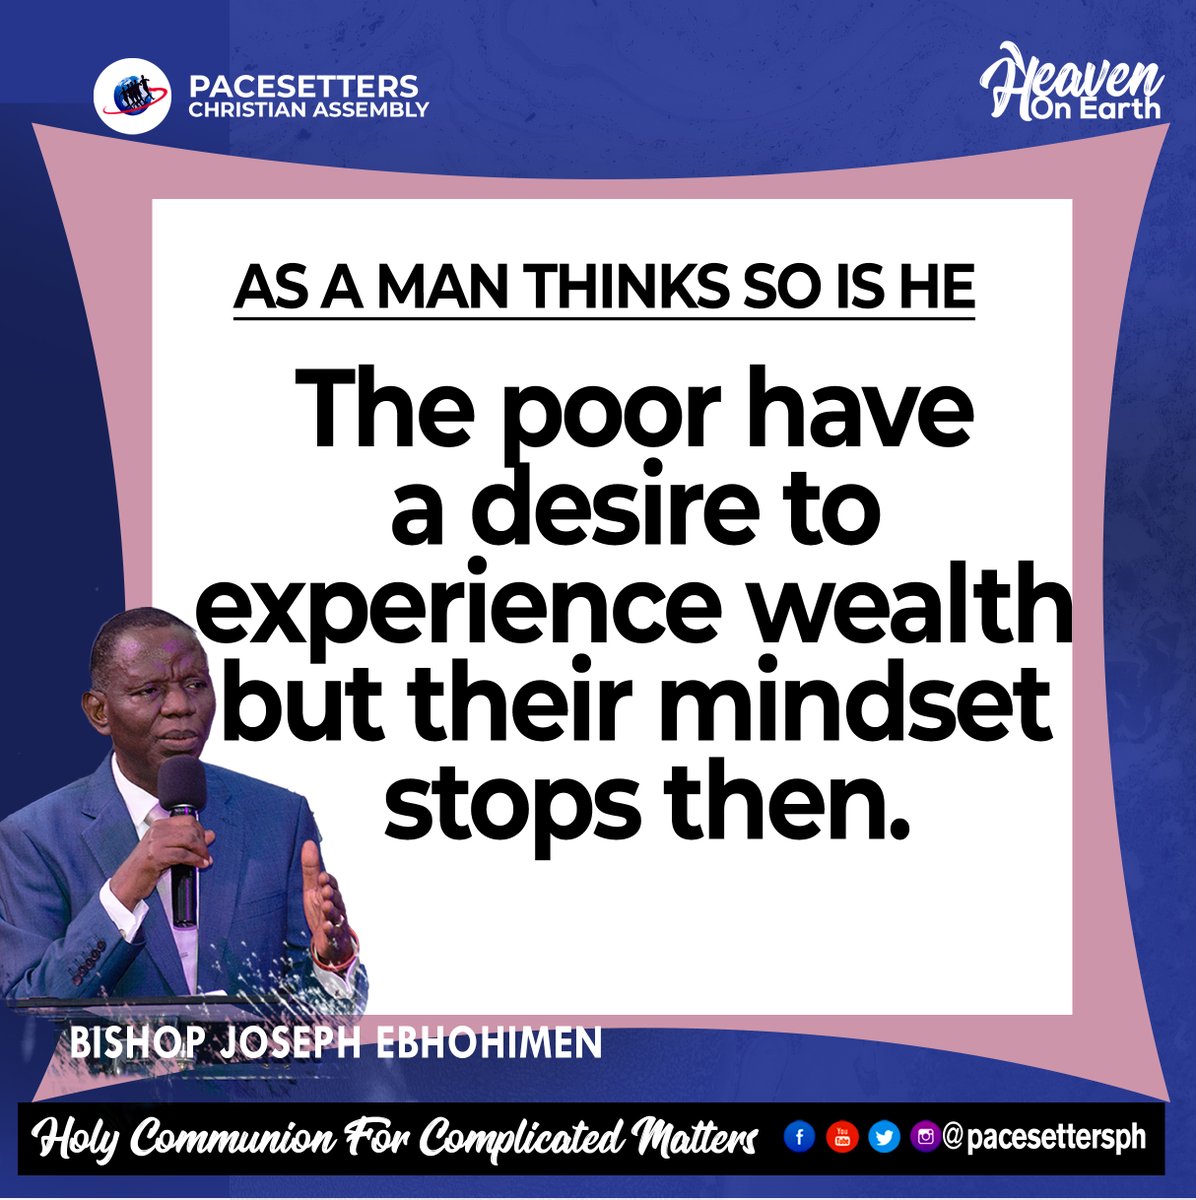 AS A MAN THINKS SO IS HE

#Asamanthinkssoishe
#Holycommunionforcomplicatedmatters
#EndofmonththanksgivingService
#Plantedbythewaters
#Heavenonearth
#Pacesettersph